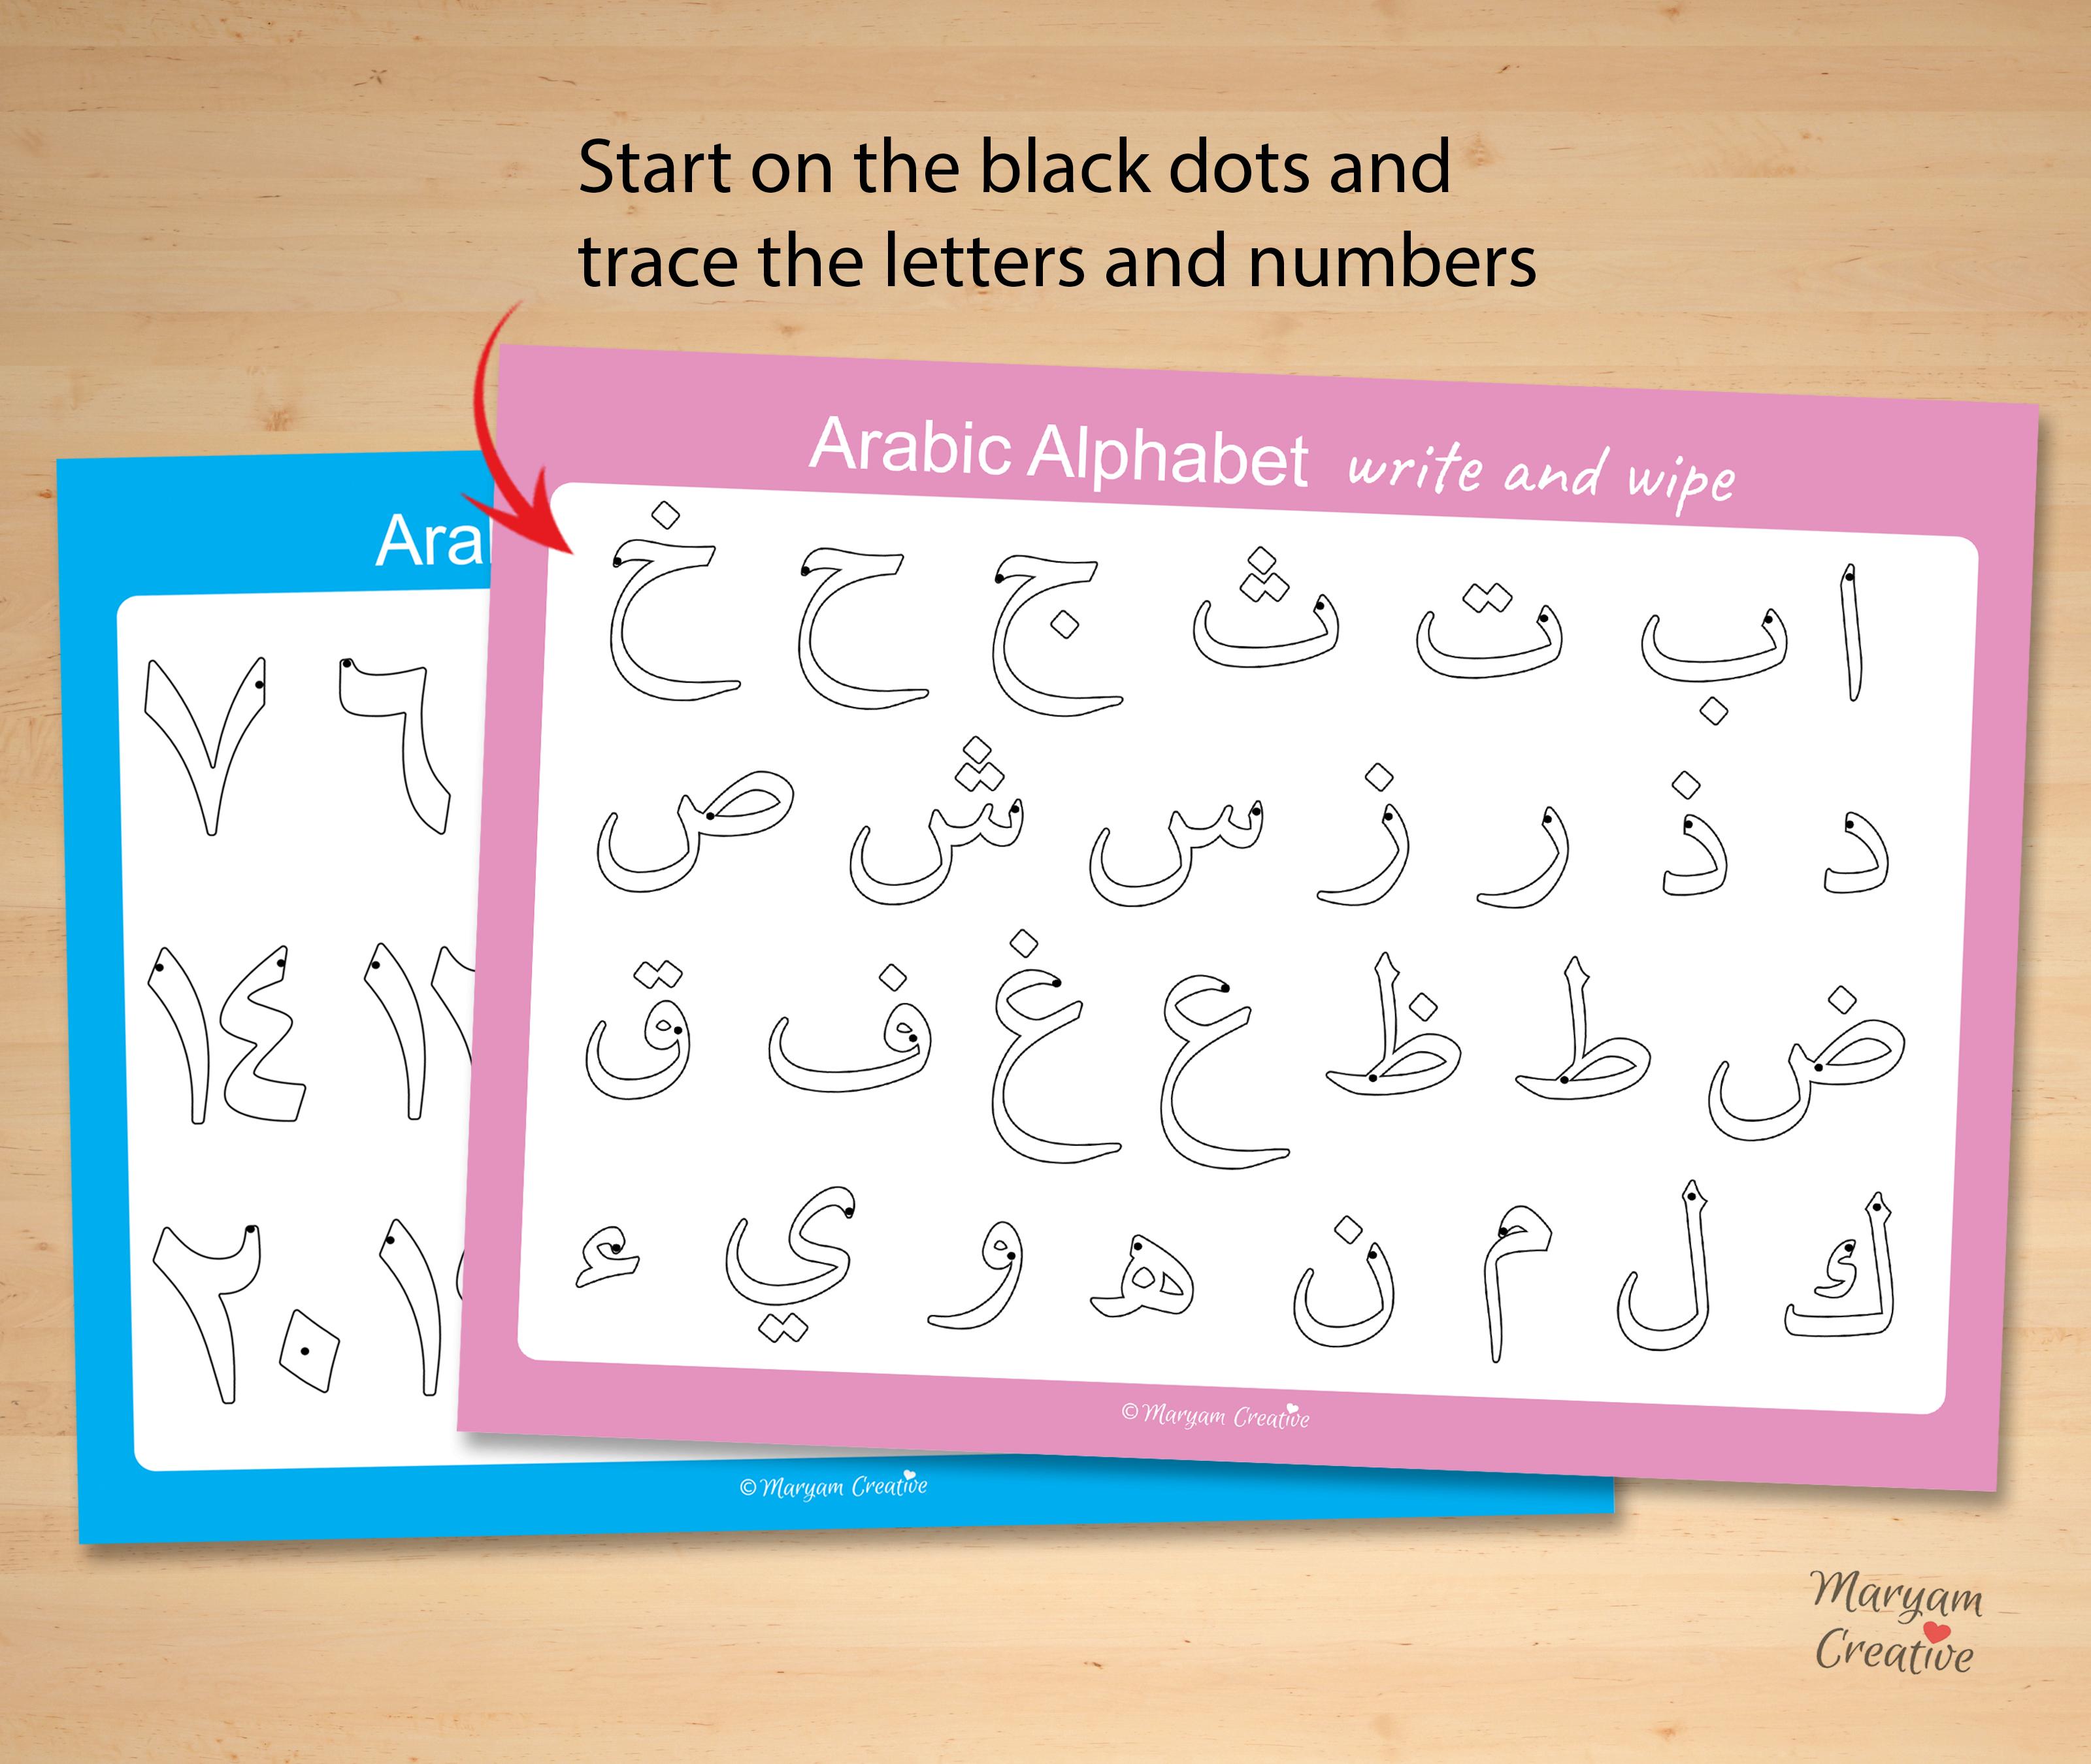 Letter Tracing Book Handwriting Alphabet for Preschoolers: Dinosaur Letter  Tracing Book Practice for Kids Ages 3+ Alphabet Writing Practice Handwritin  (Paperback)